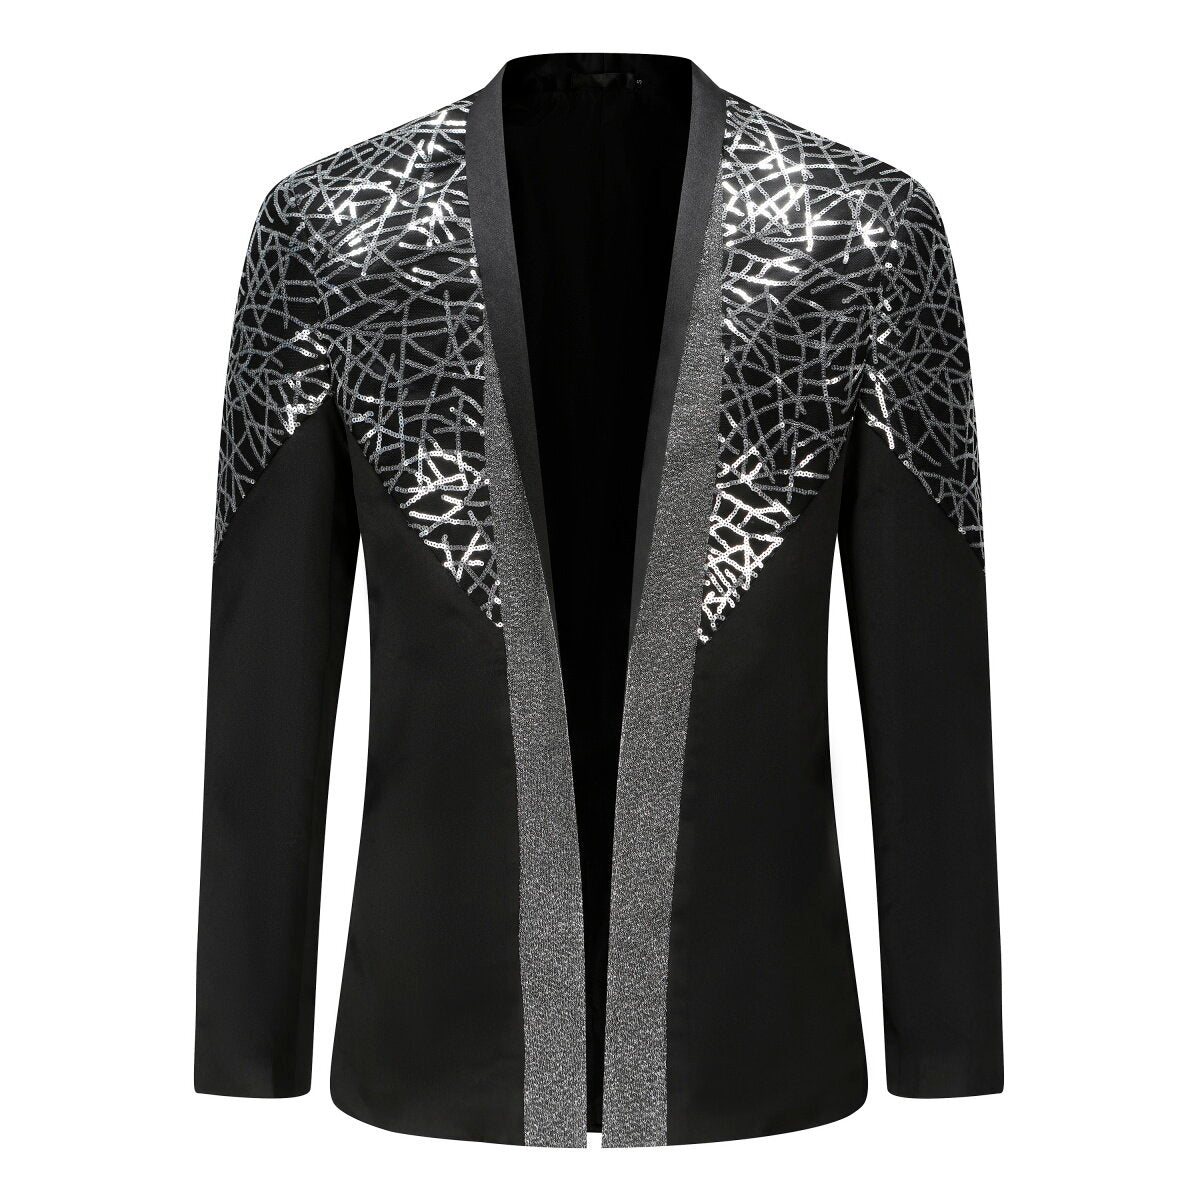 Men's Sequined Stand Collar Single-Breasted Blazer Black